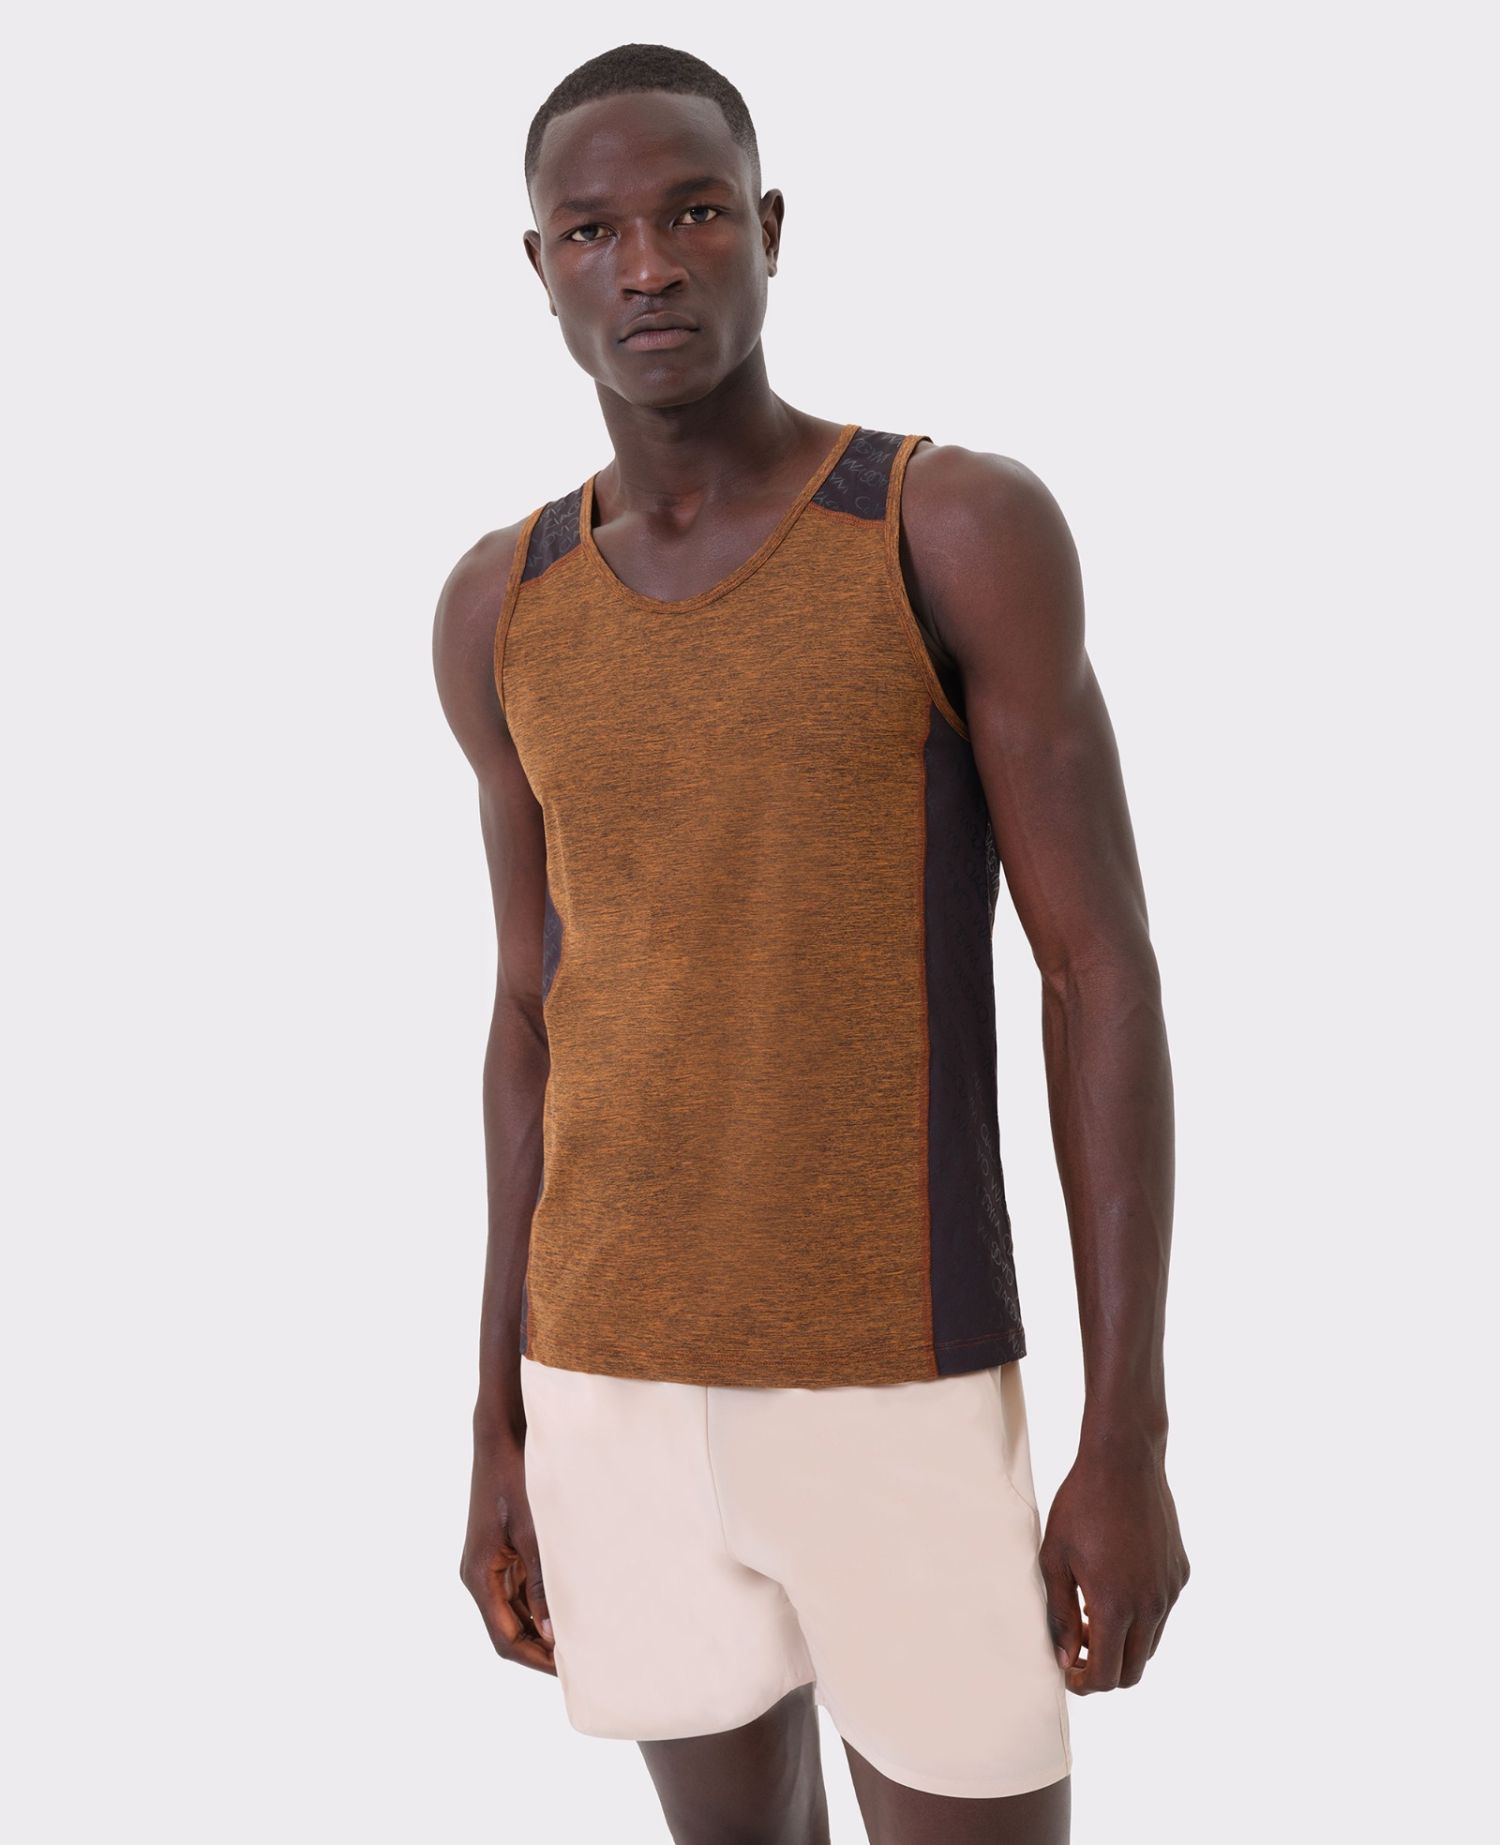 All Over Me Tank Top Light brown